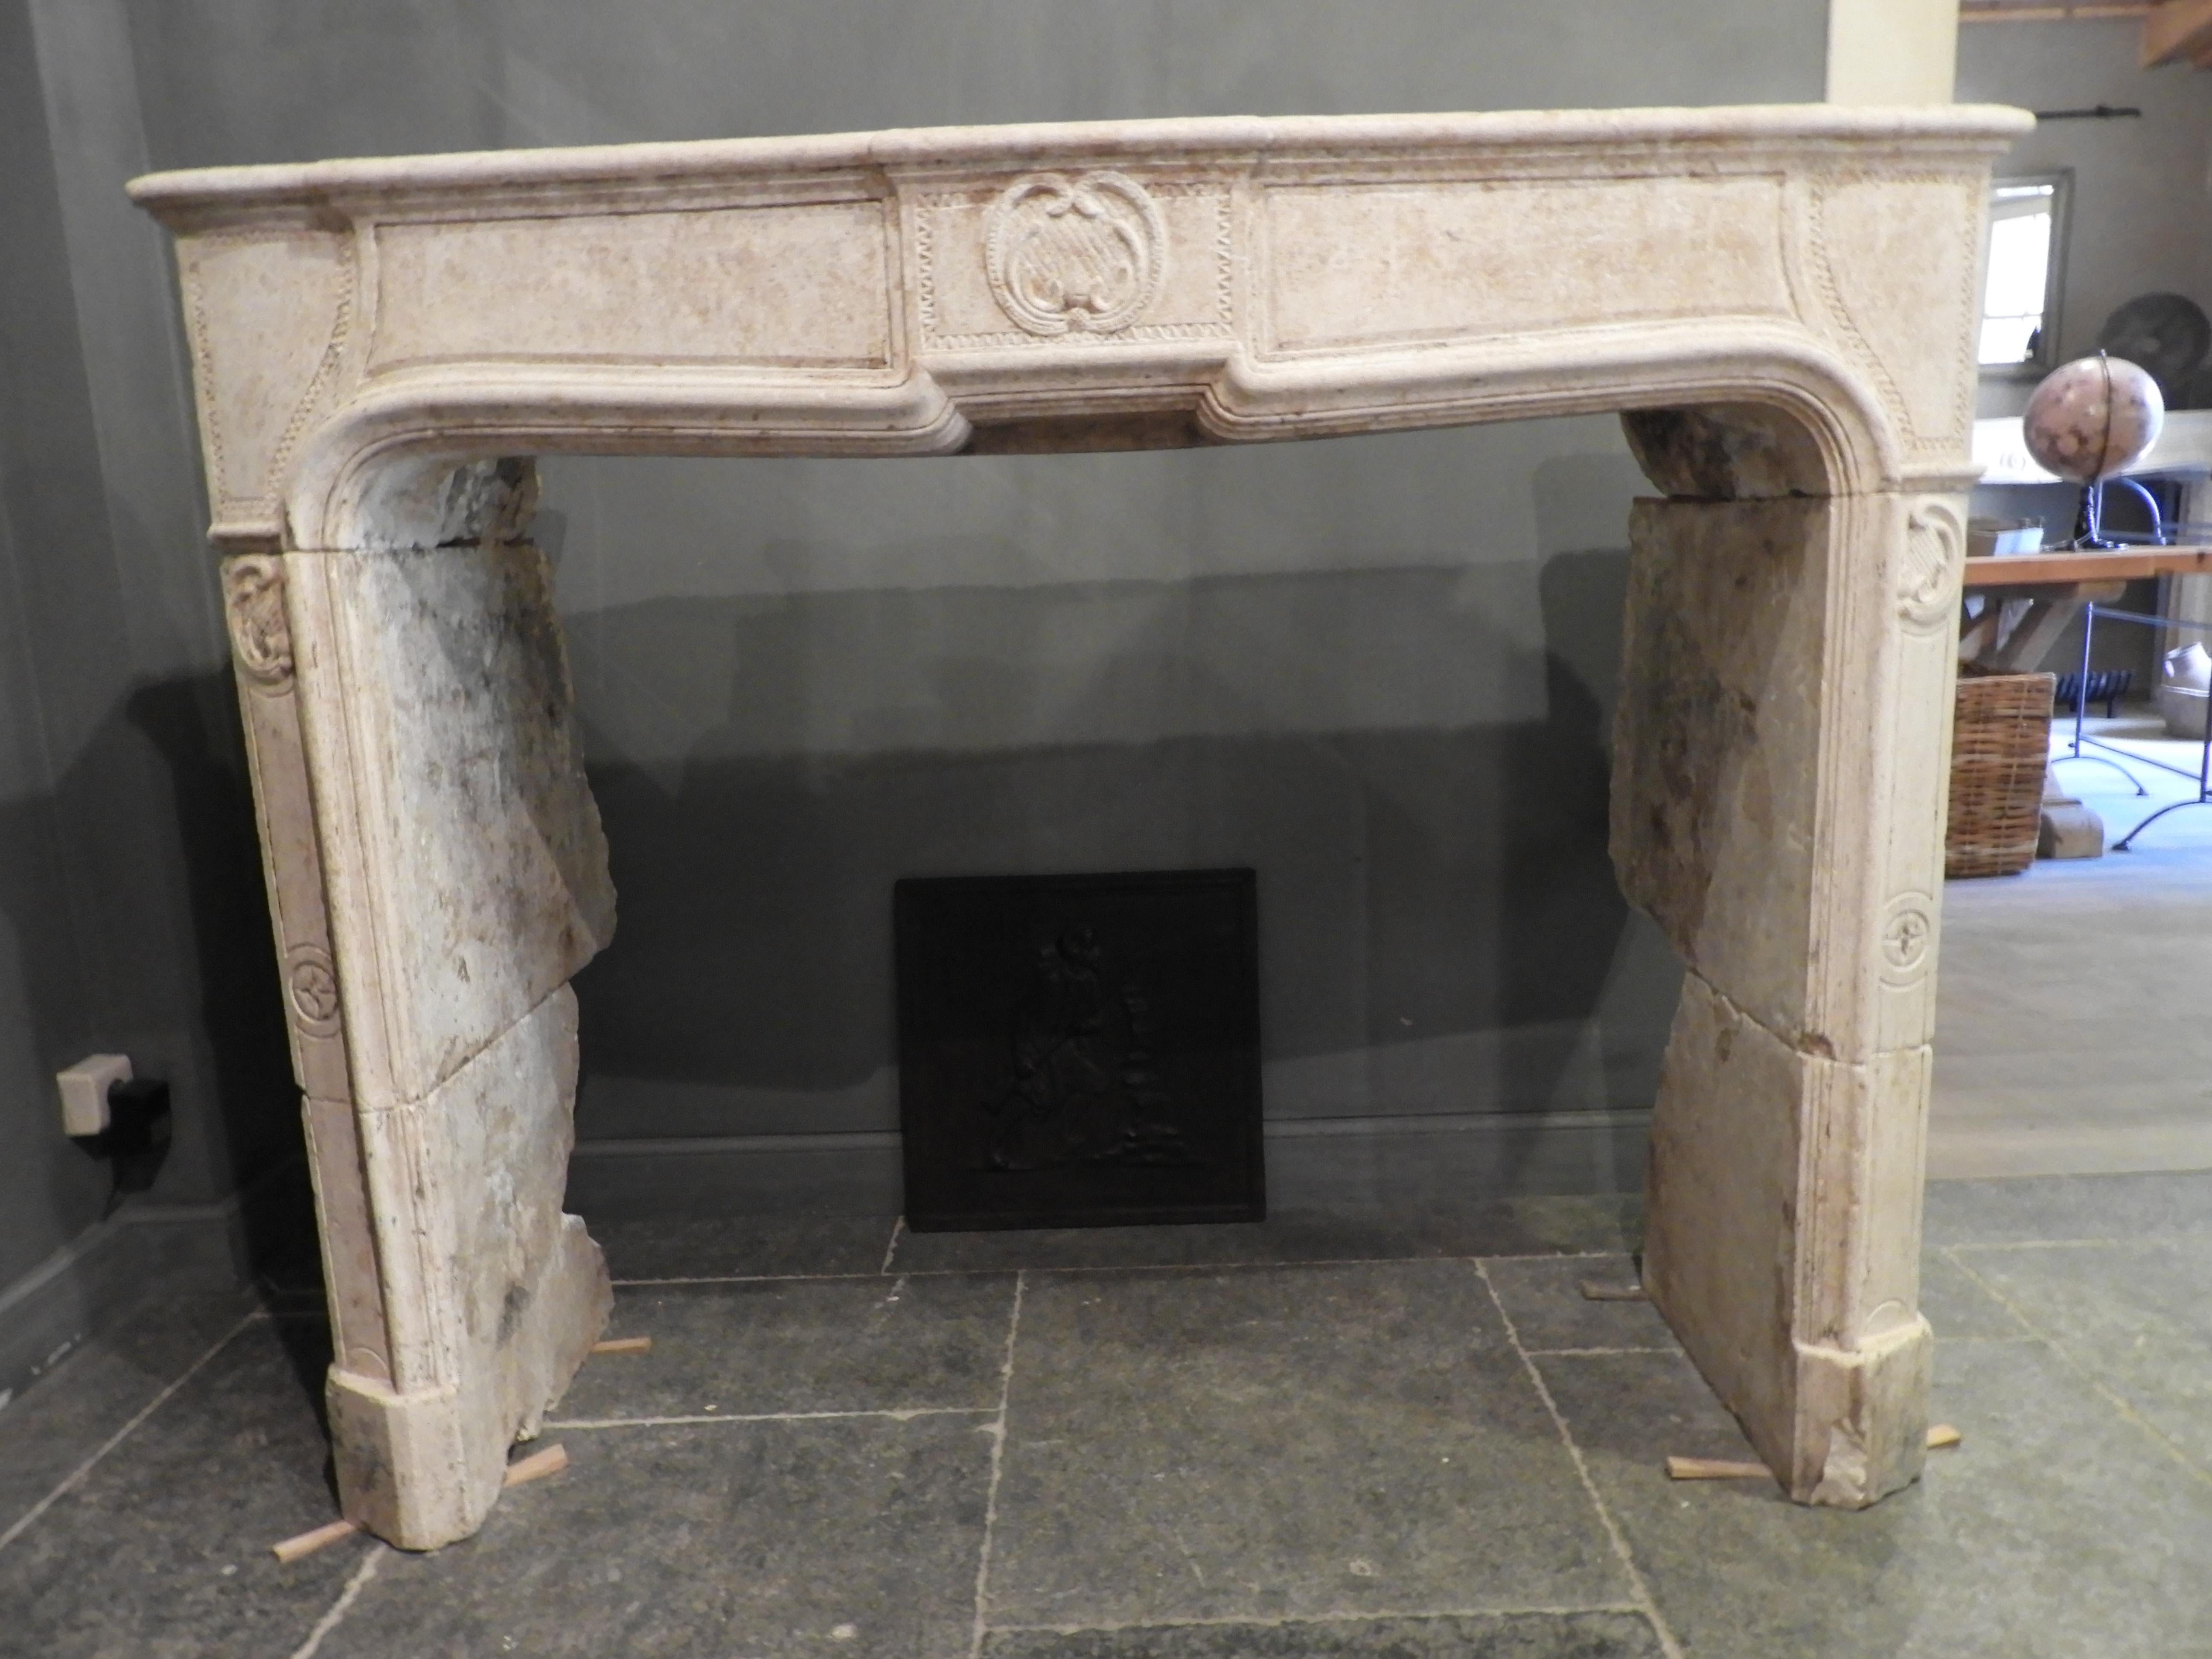 Louis XV fireplace, at least from the early 19th century in warm being/light brown color stone. It has very nice details an decorations without being too ornate.
The fireplace is in good condition, there are no damages worth mentioning.
Beautiful